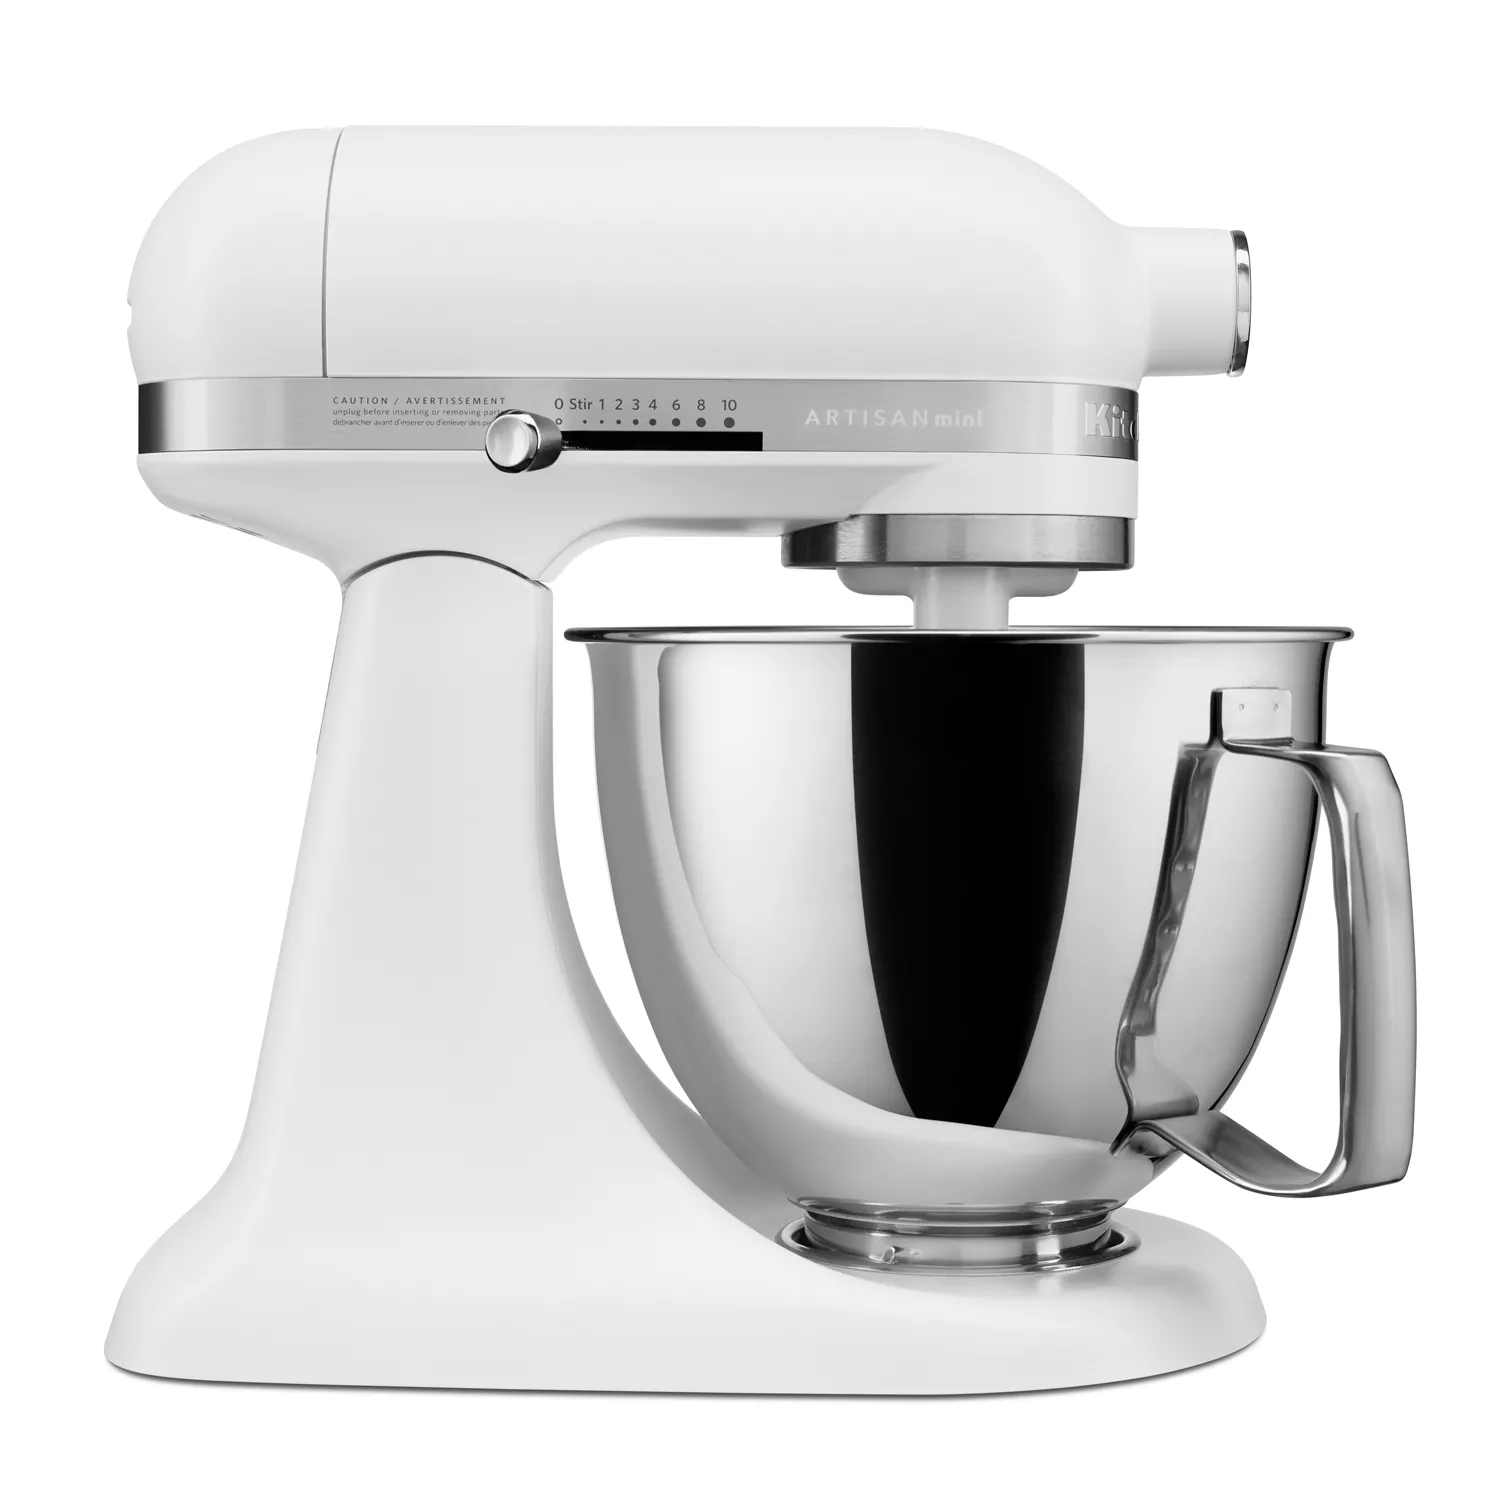 KitchenAid Mixers Are On Sale At Sur La Table, Including One With More Than  1,300 5-Star Reviews